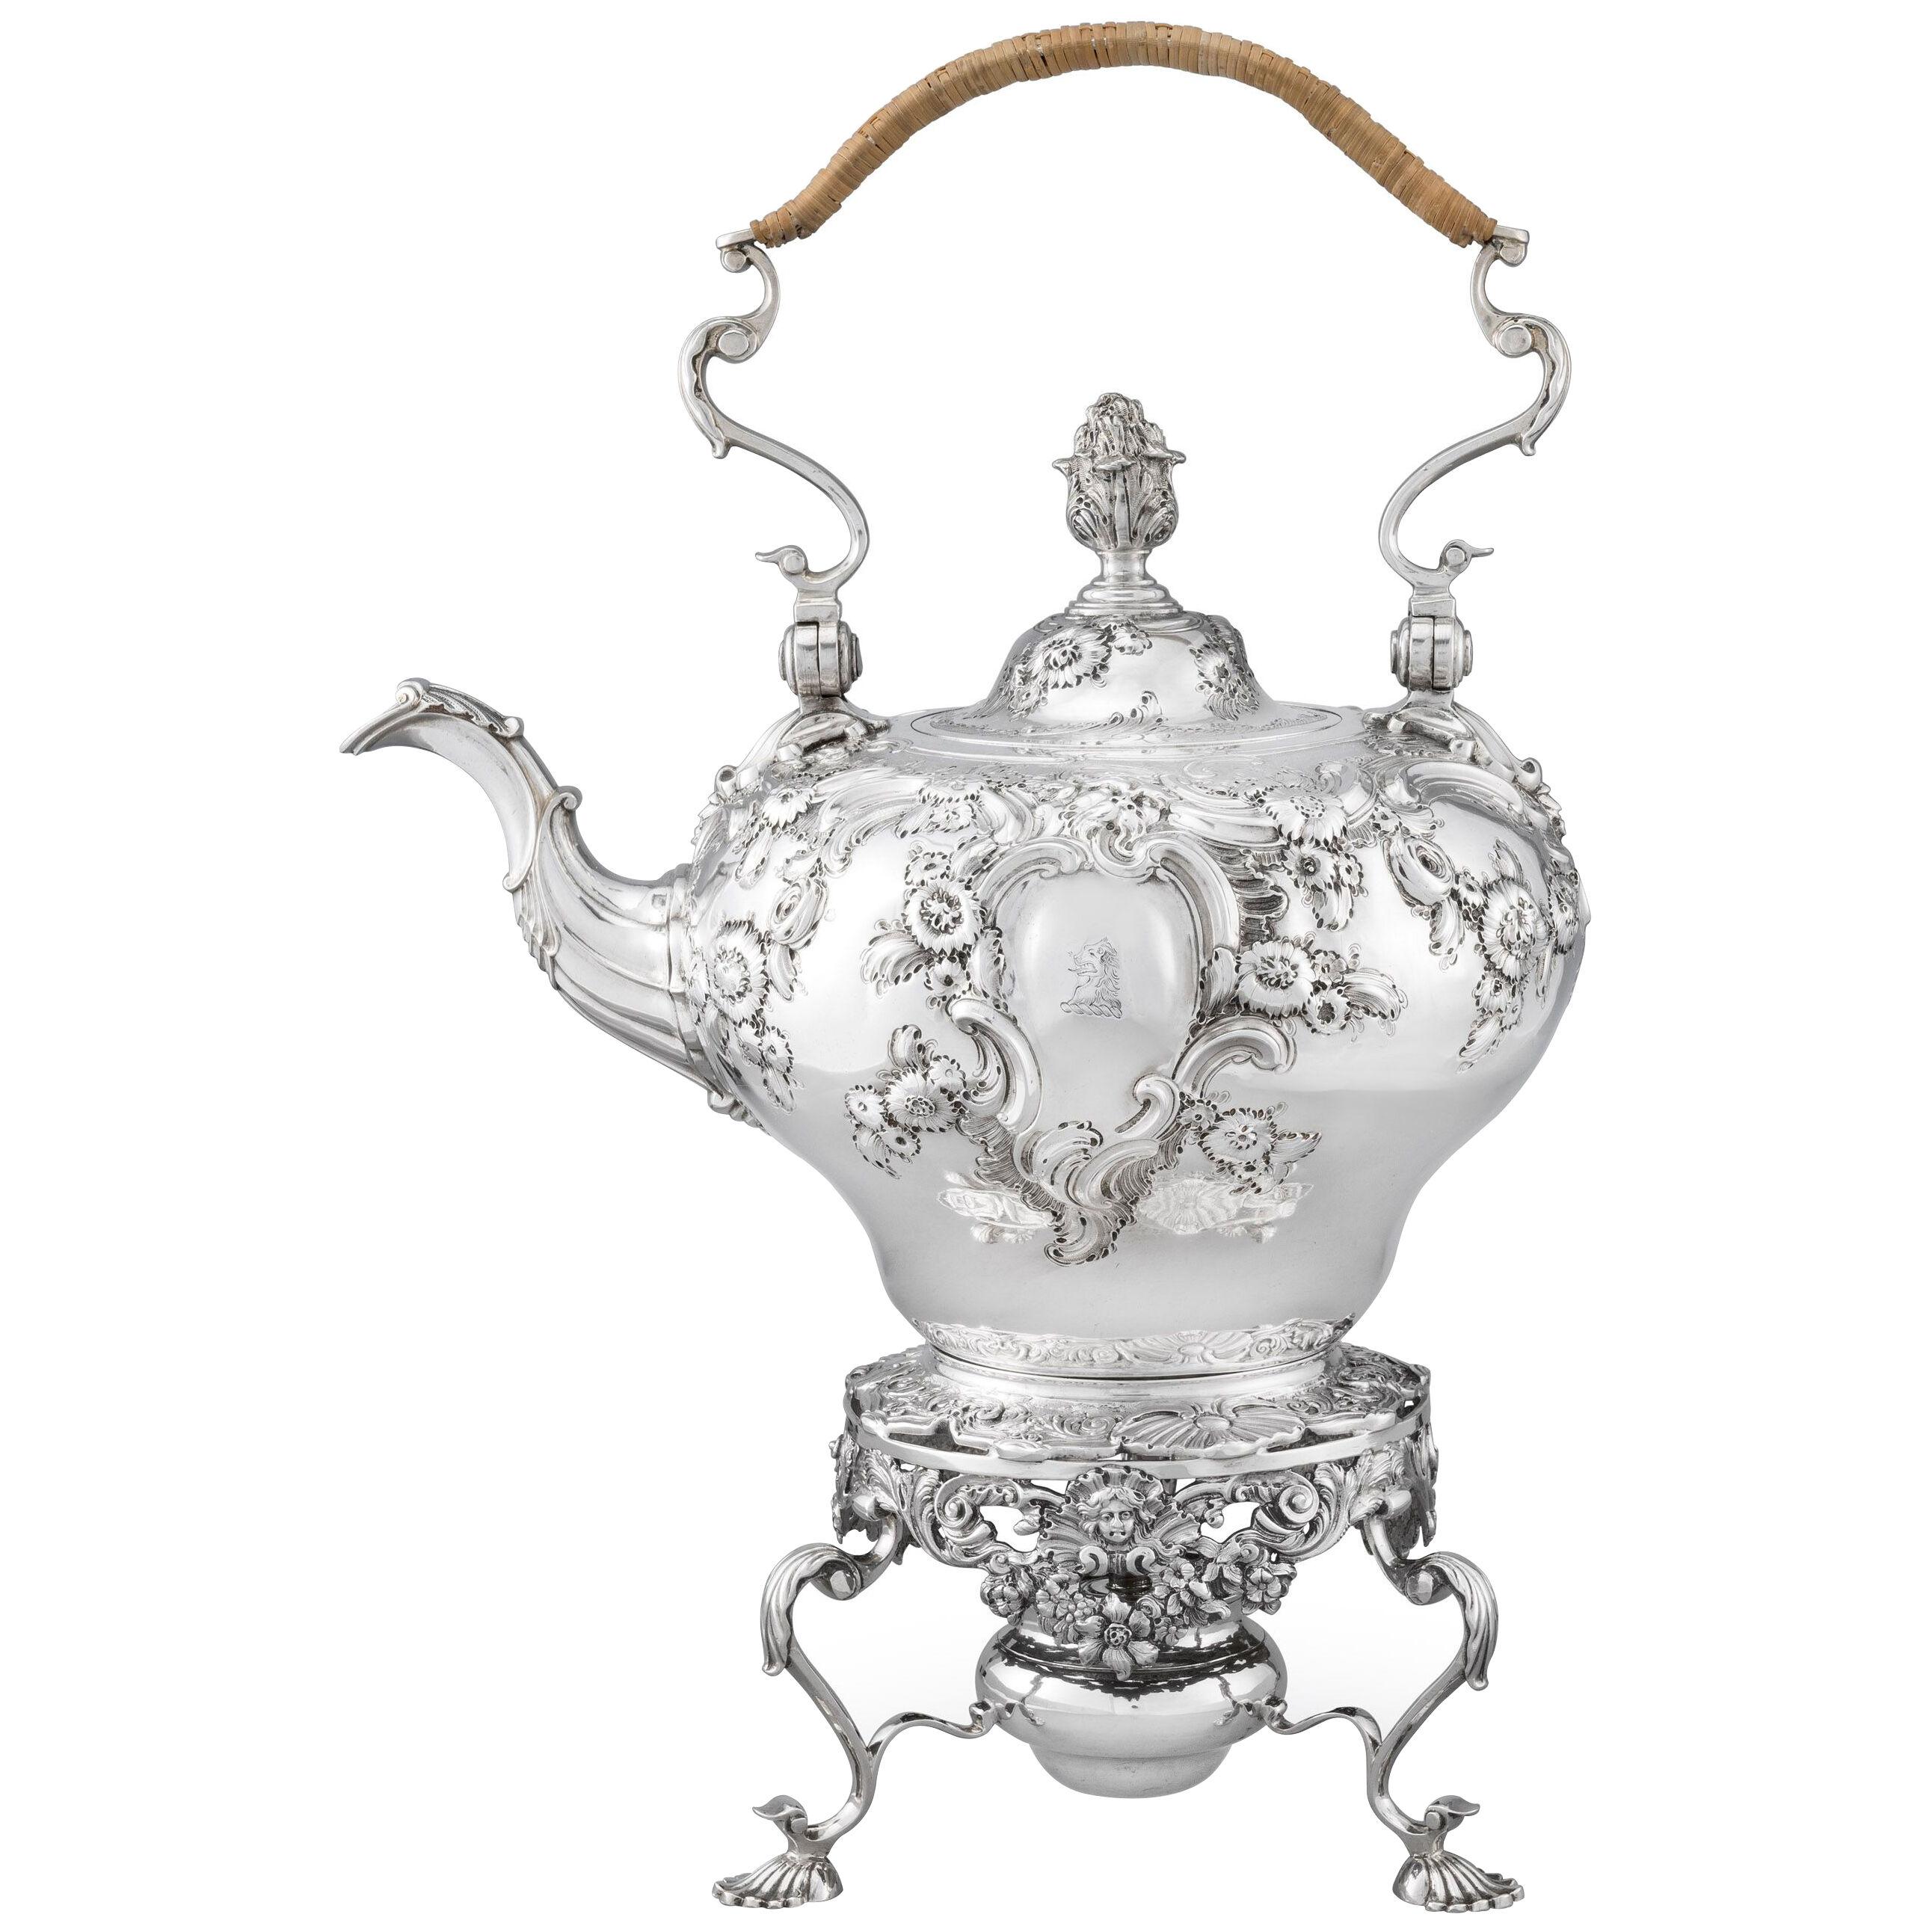 An Antique Silver George II Kettle on Stand